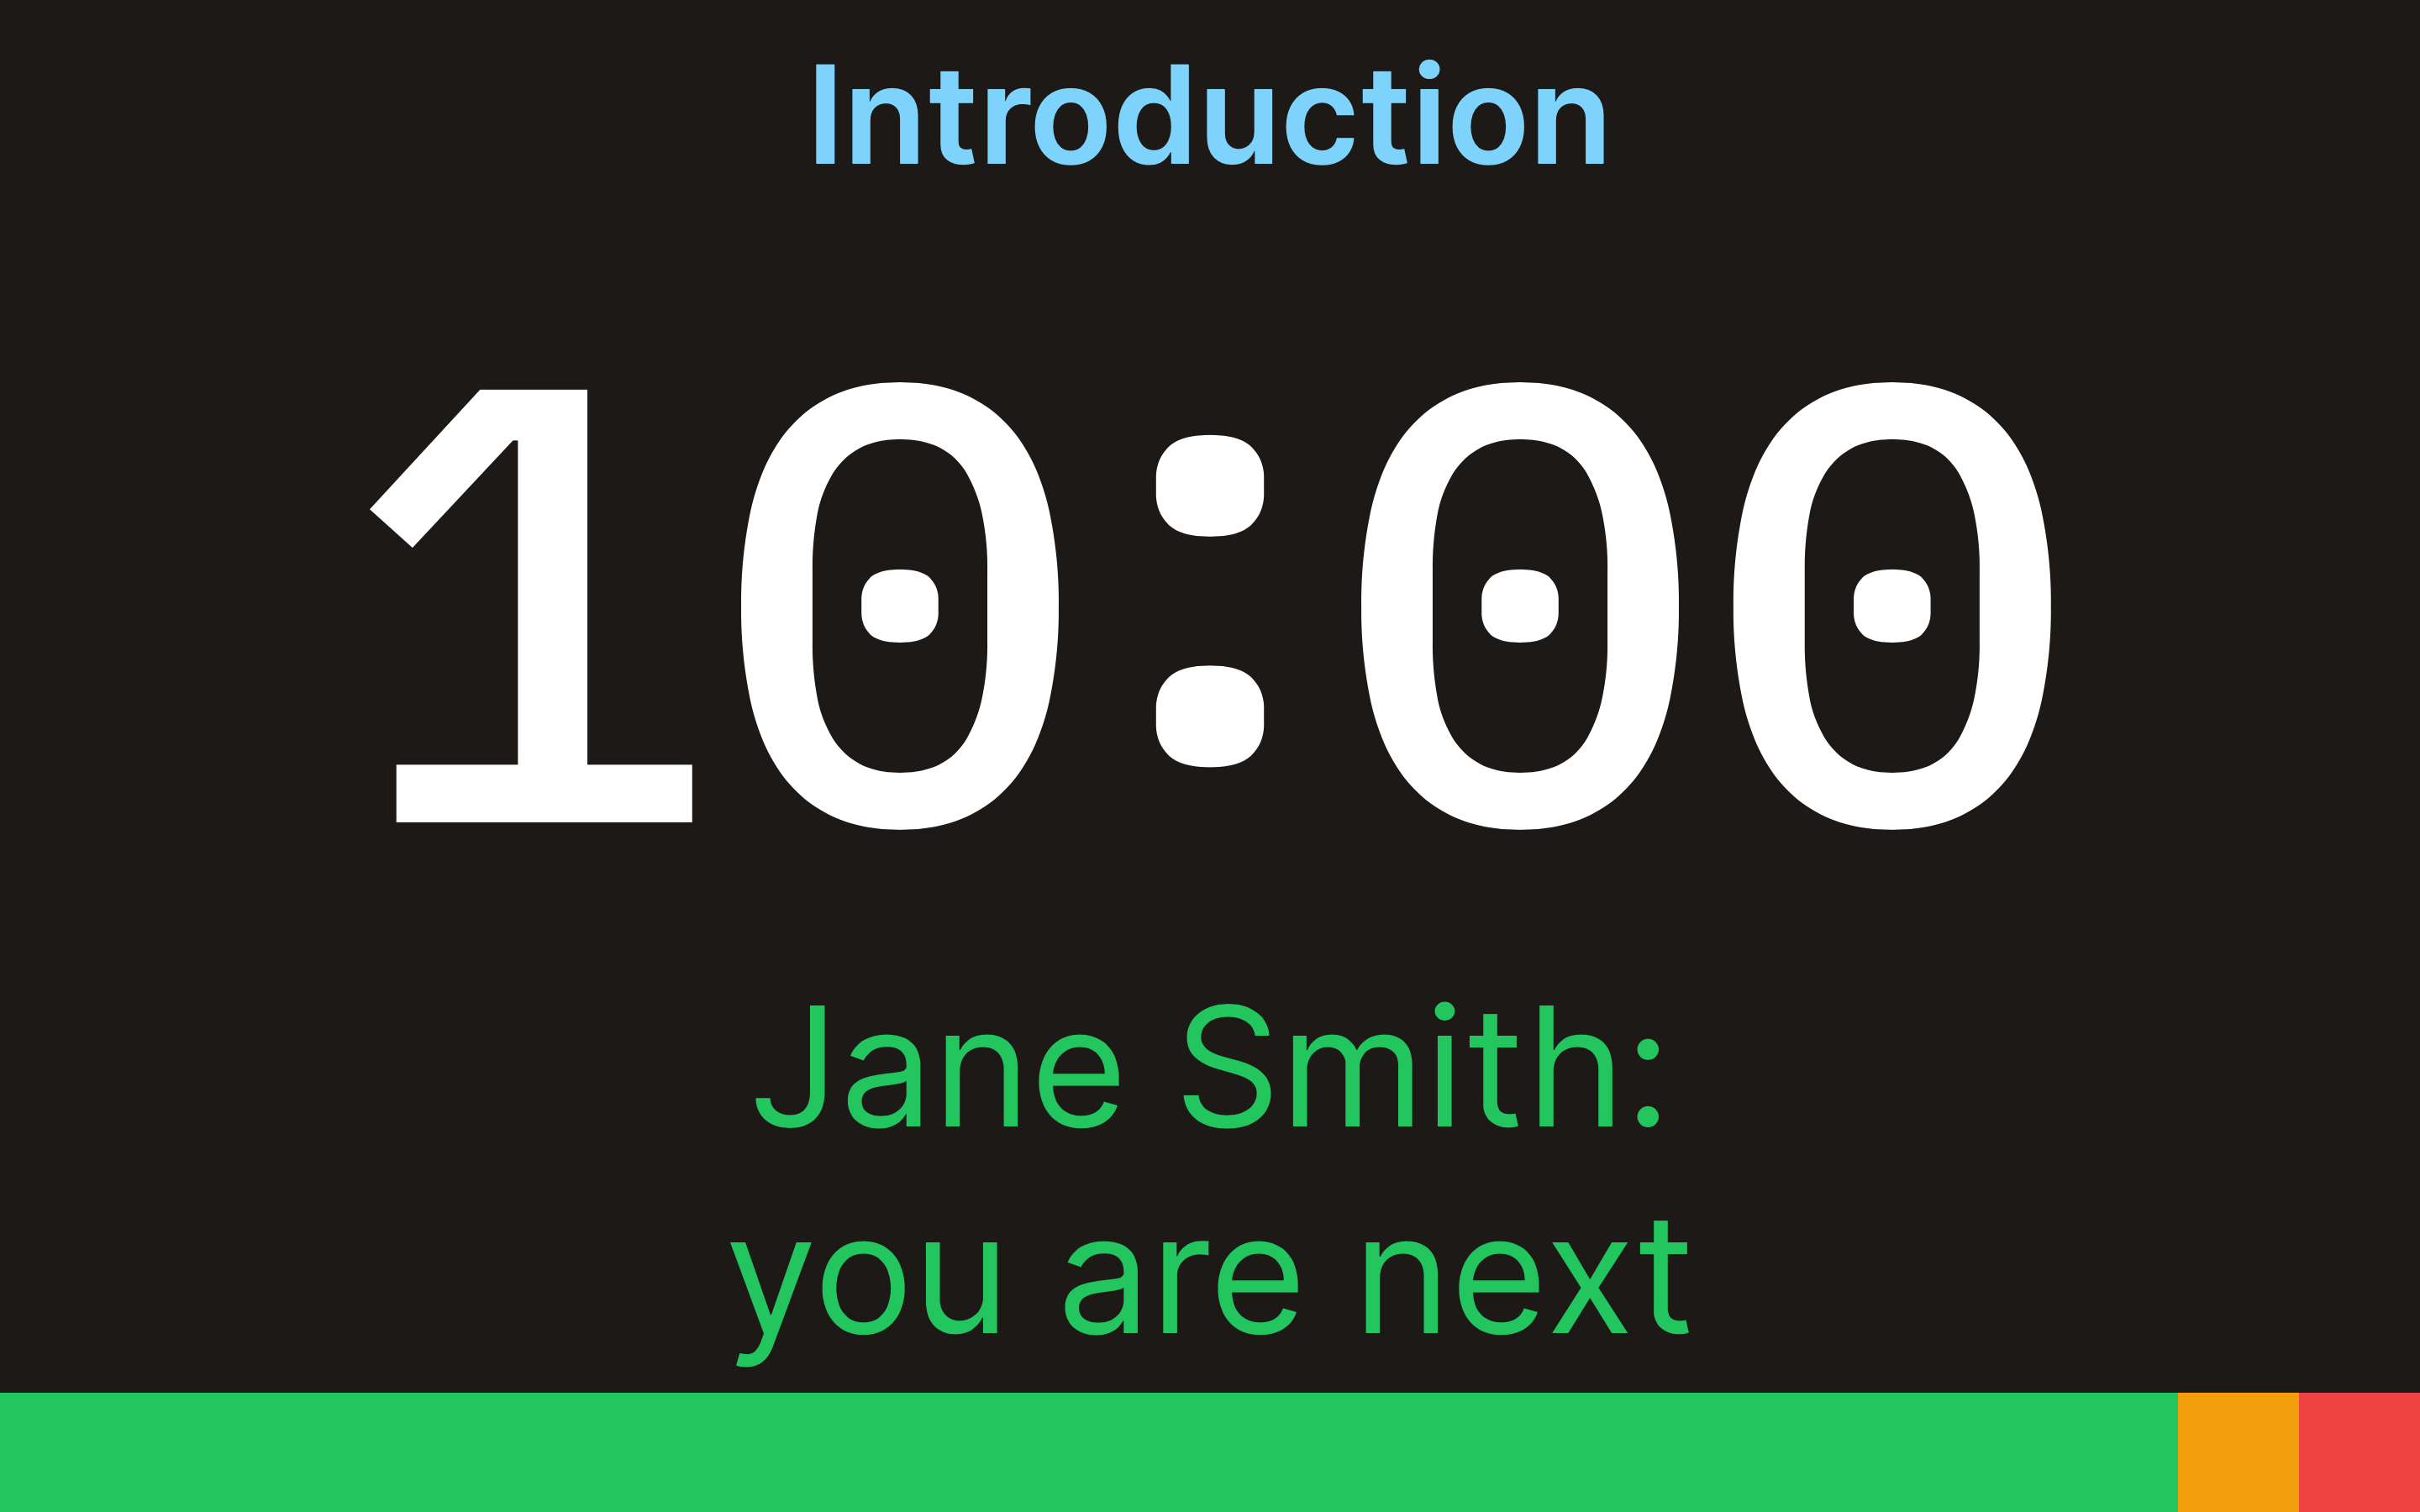 Display messages to presenters through the speaker view of the timer